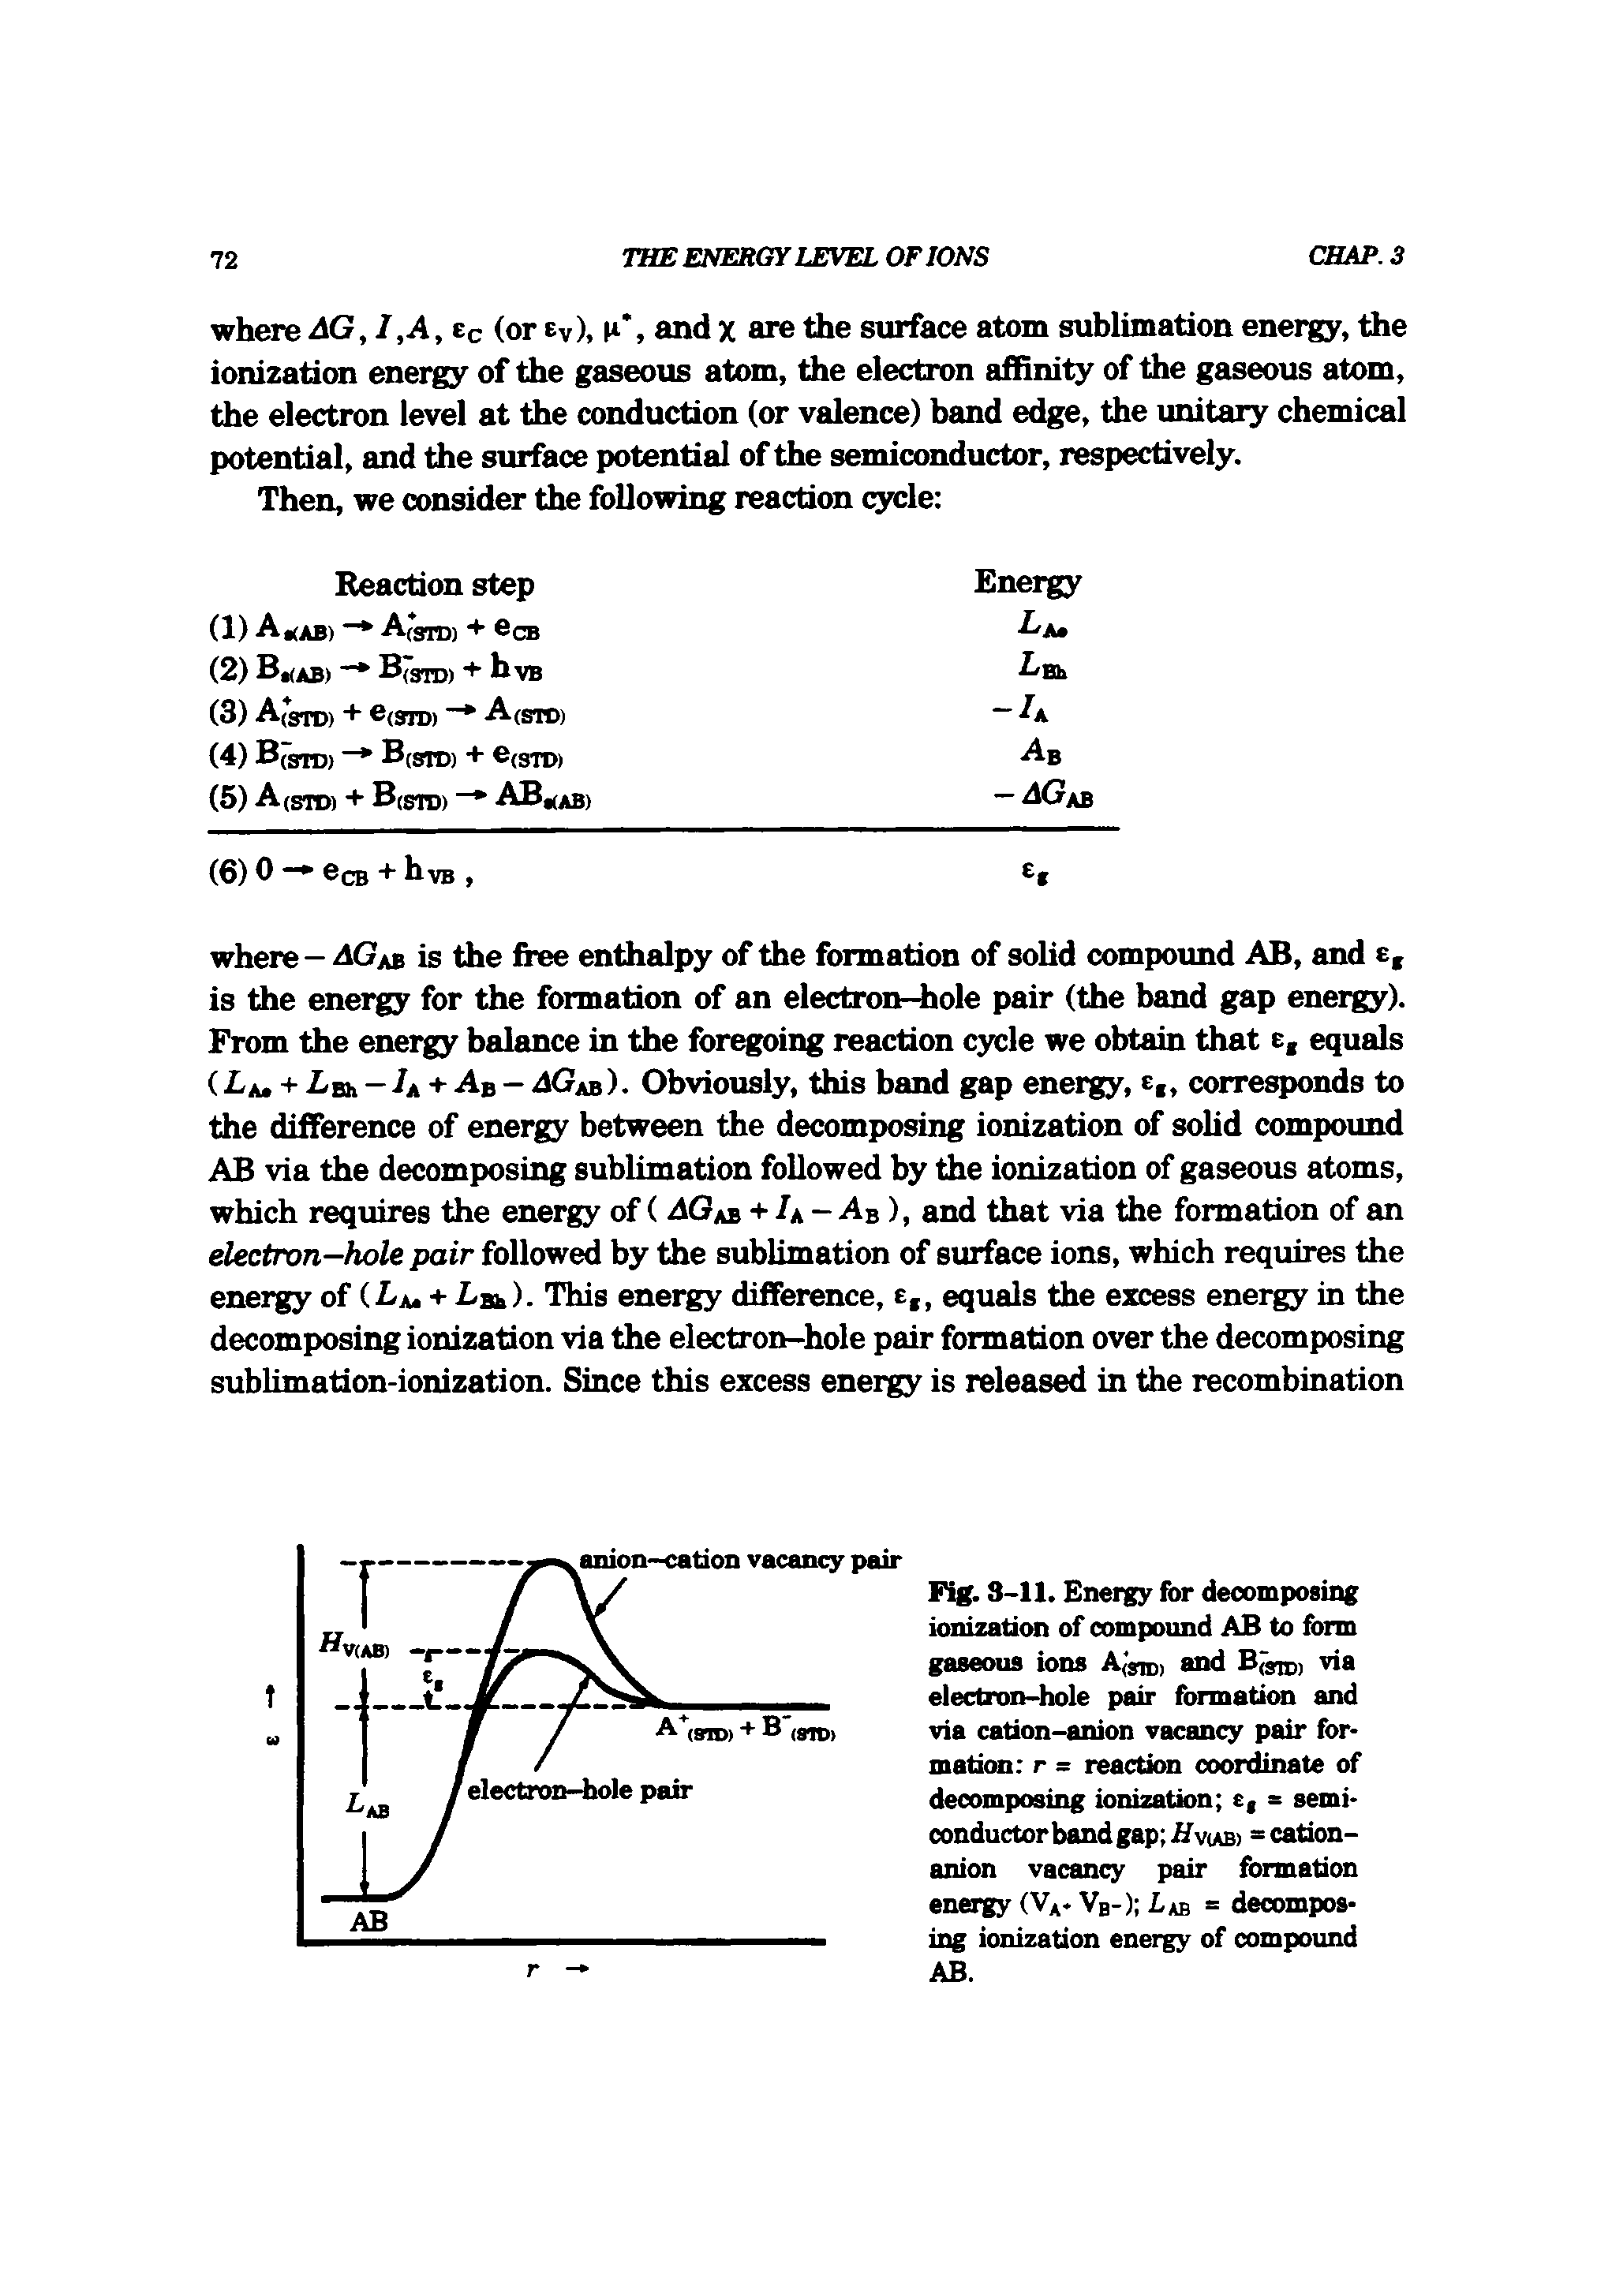 Fig. 3-11. Energy for decomposing ionization of compound AB to form gaseous ions A(giD) and via electron-hole pair formation and via cation-anion vacancy pair formation r = reaction coordinate of decomposing ionization e, s semiconductor band gap . vmb) = cation-anion vacancy pair formation energy (Va- Vb-) Lab = decomposing ionization energy of compound AB.